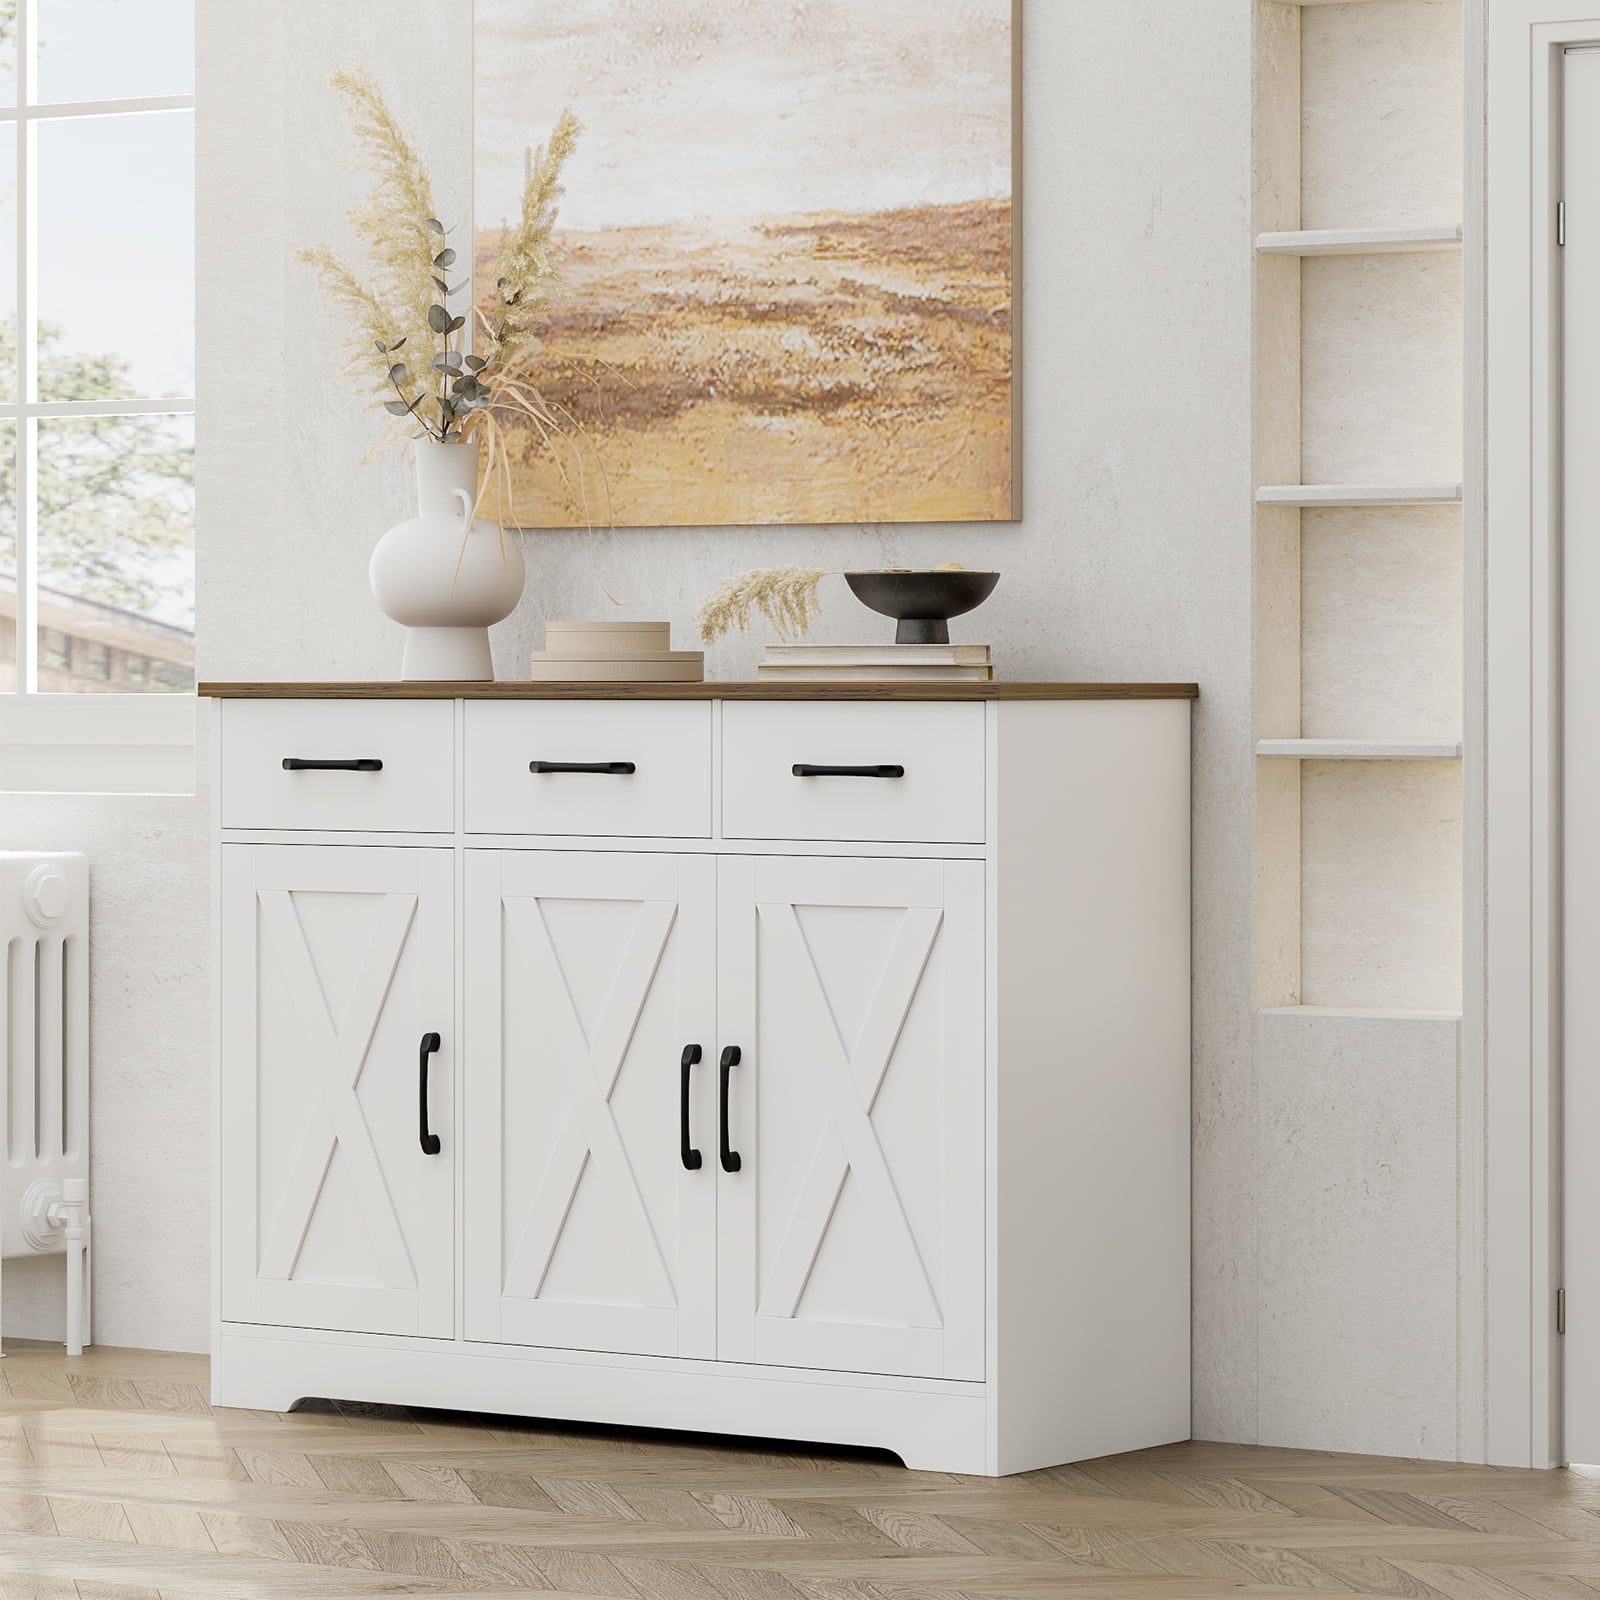 2020 Homfa 42.5'' Kitchen Buffet Sideboard Cabinet, 3 Drawers Farmhouse Coffee  Bar Storage Cabinet With Adjustable Shelf, White – Walmart Throughout 3 Drawers Sideboards Storage Cabinet (Photo 2 of 15)